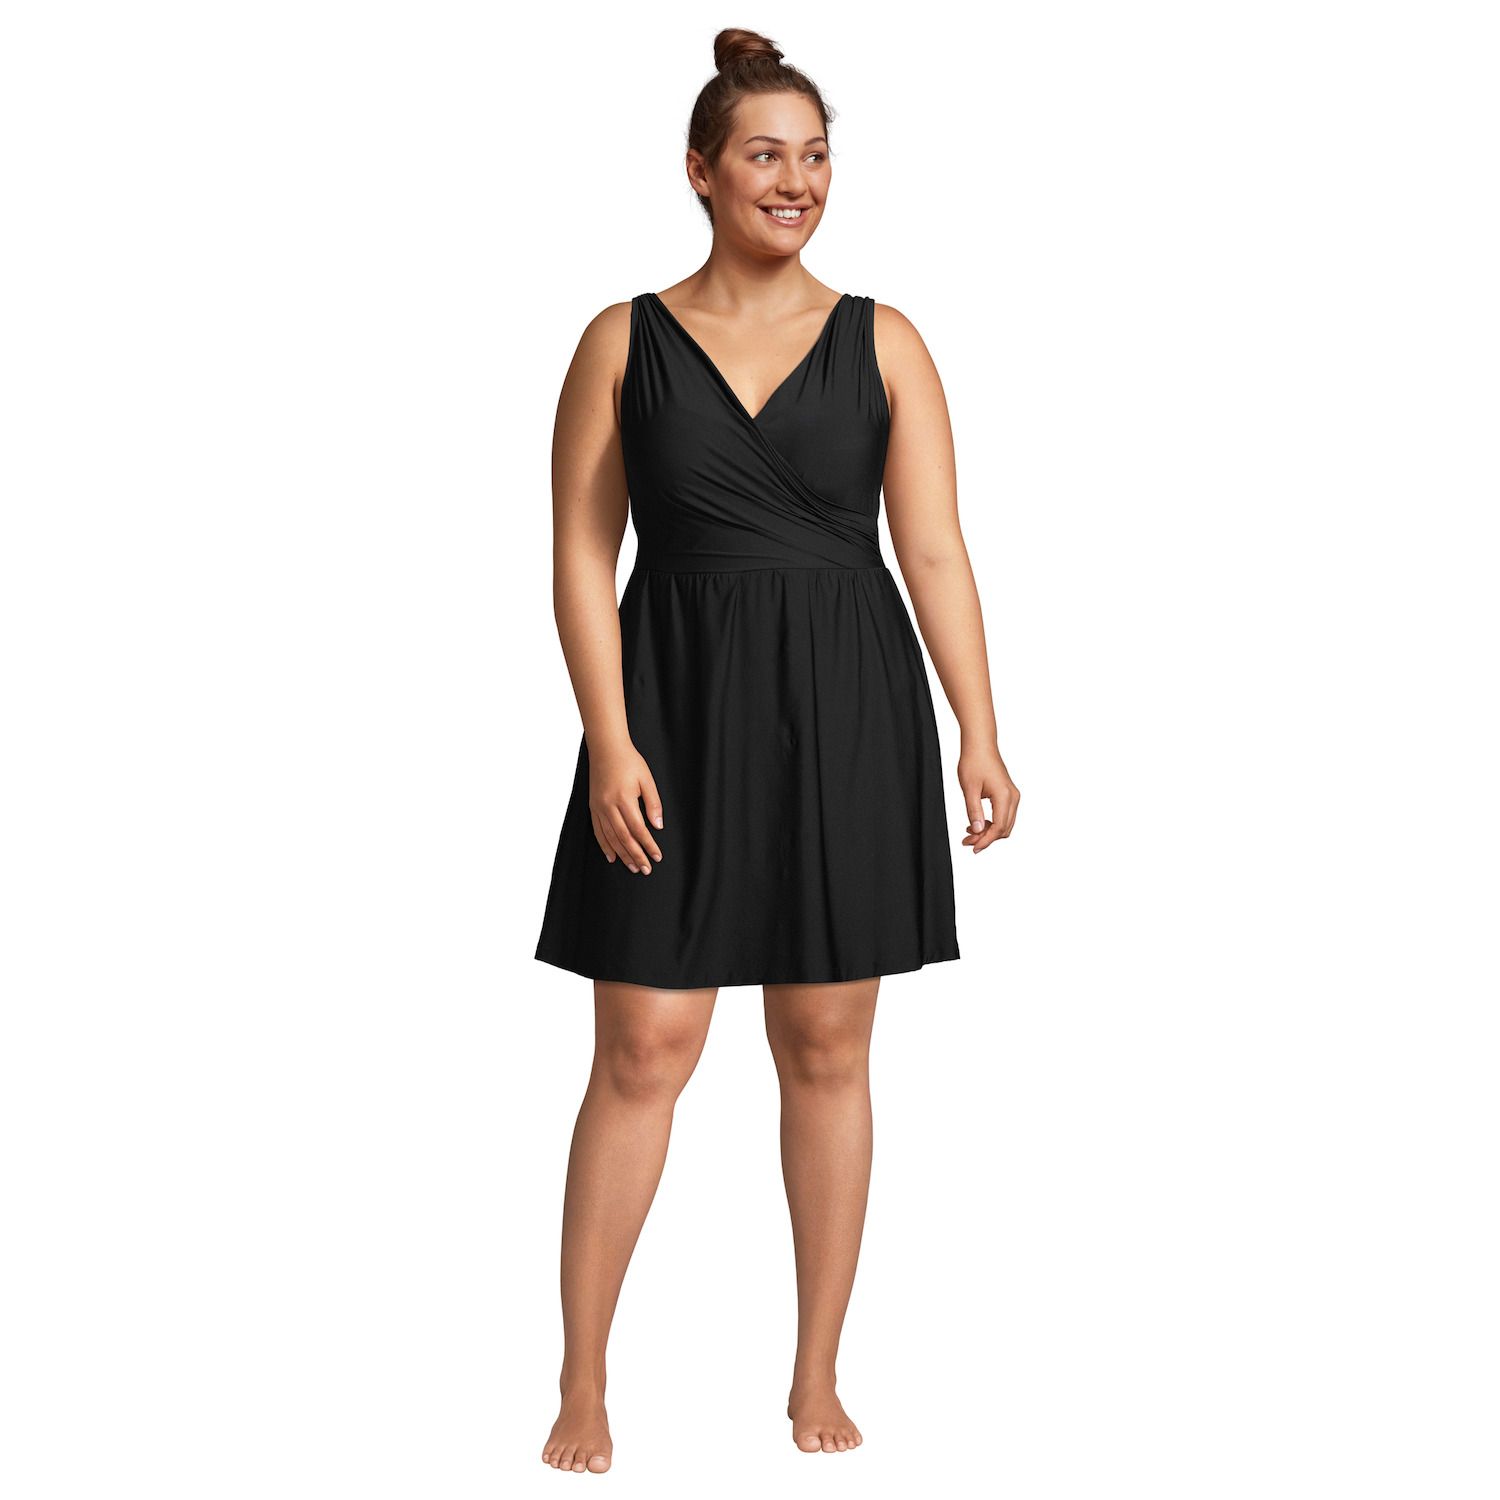 Image for Lands' End Plus Size DDD-Cup UPF 50 Tummy Control Surplice One-Piece Swimdress at Kohl's.